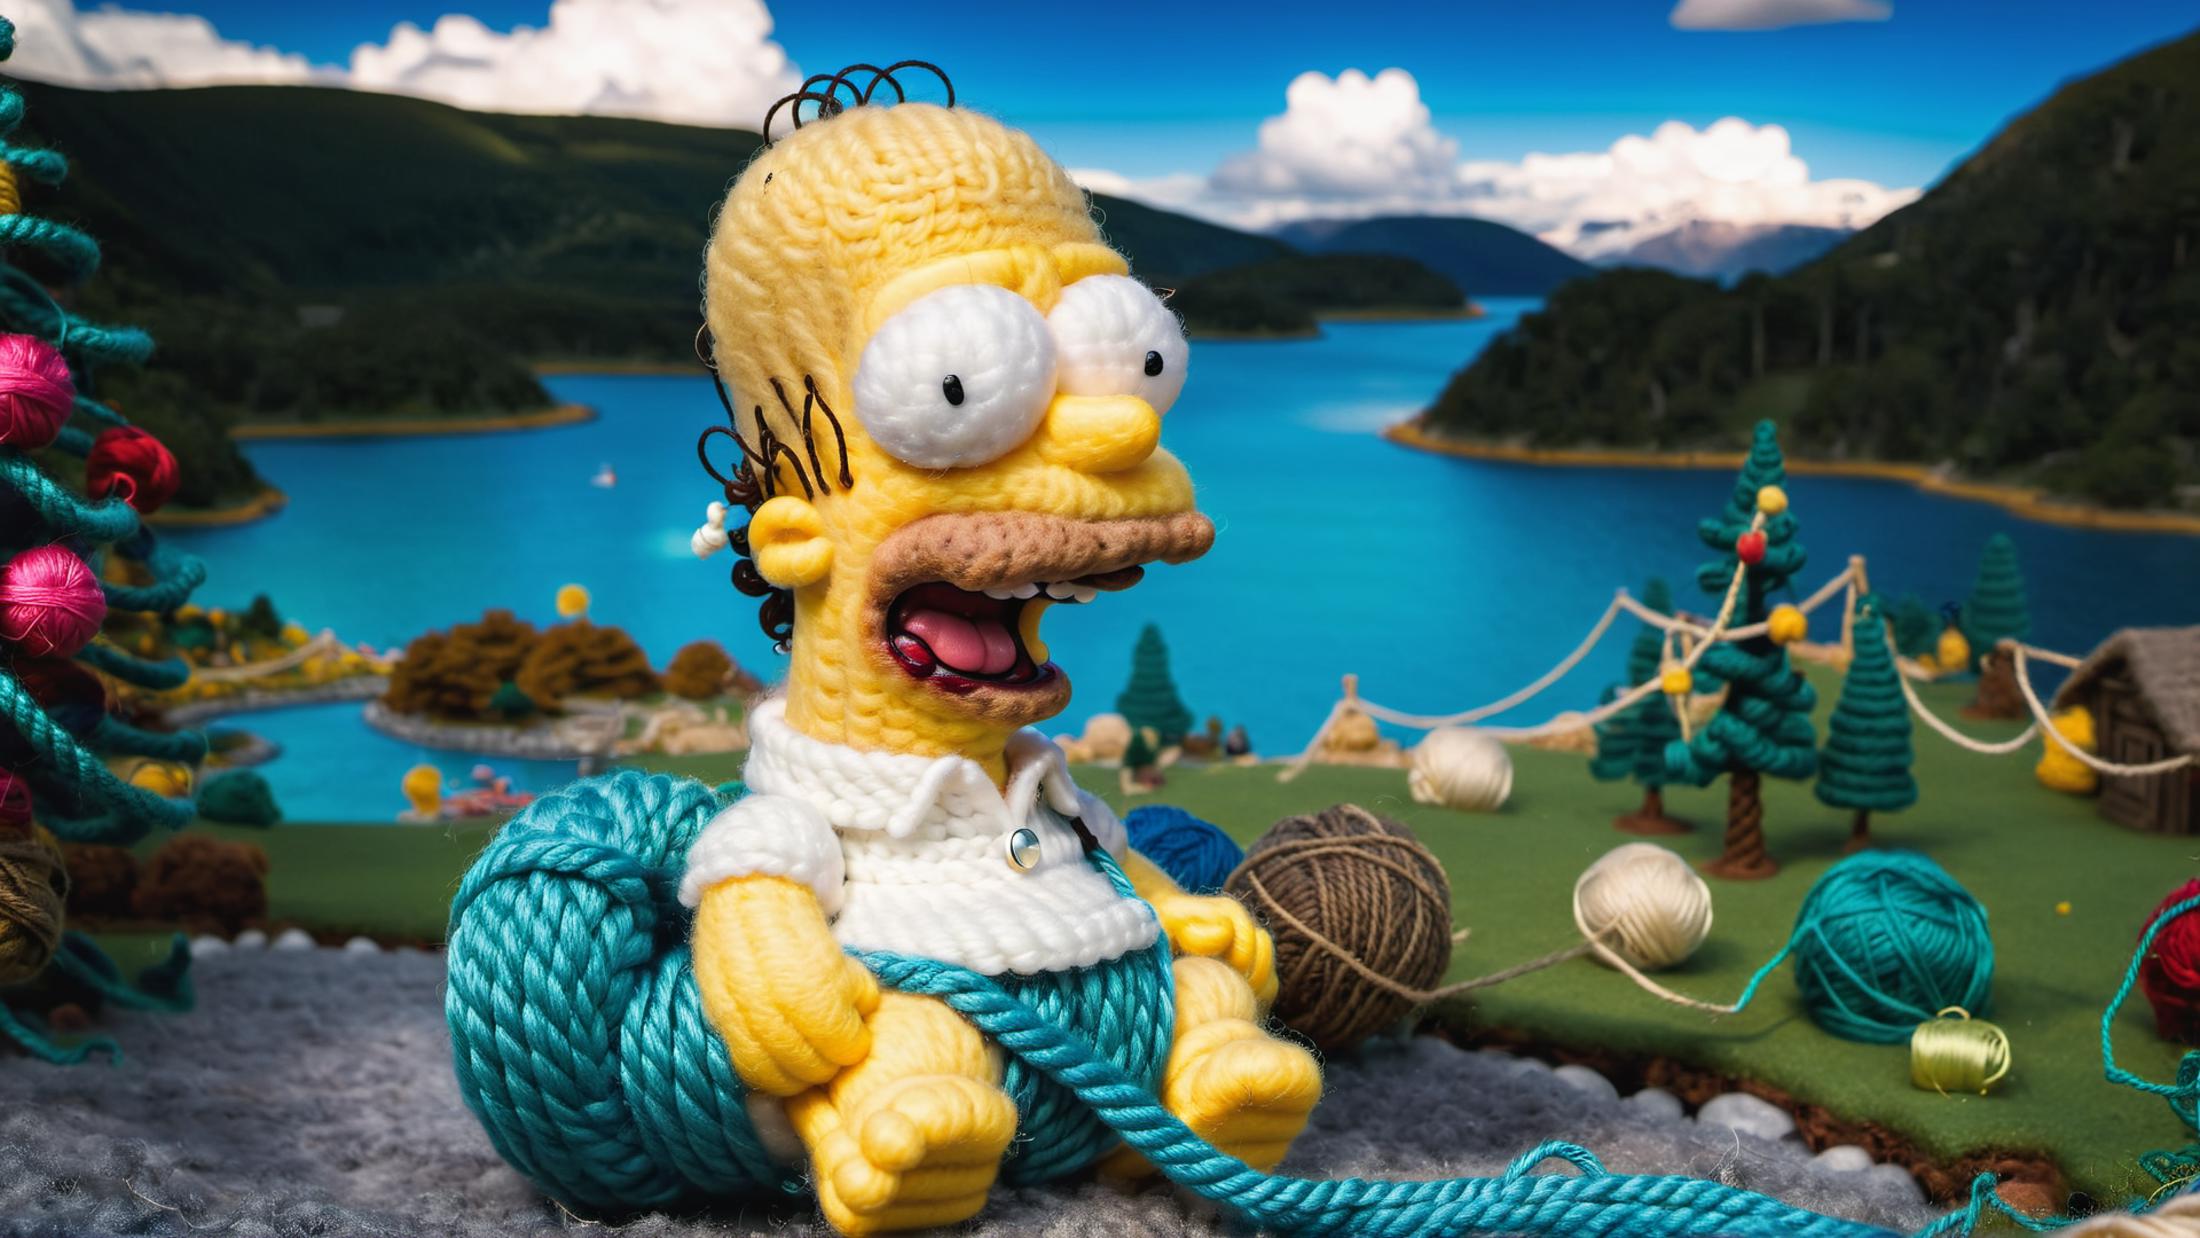 A Simpsons-themed doll sitting on a rope in a scenic setting.